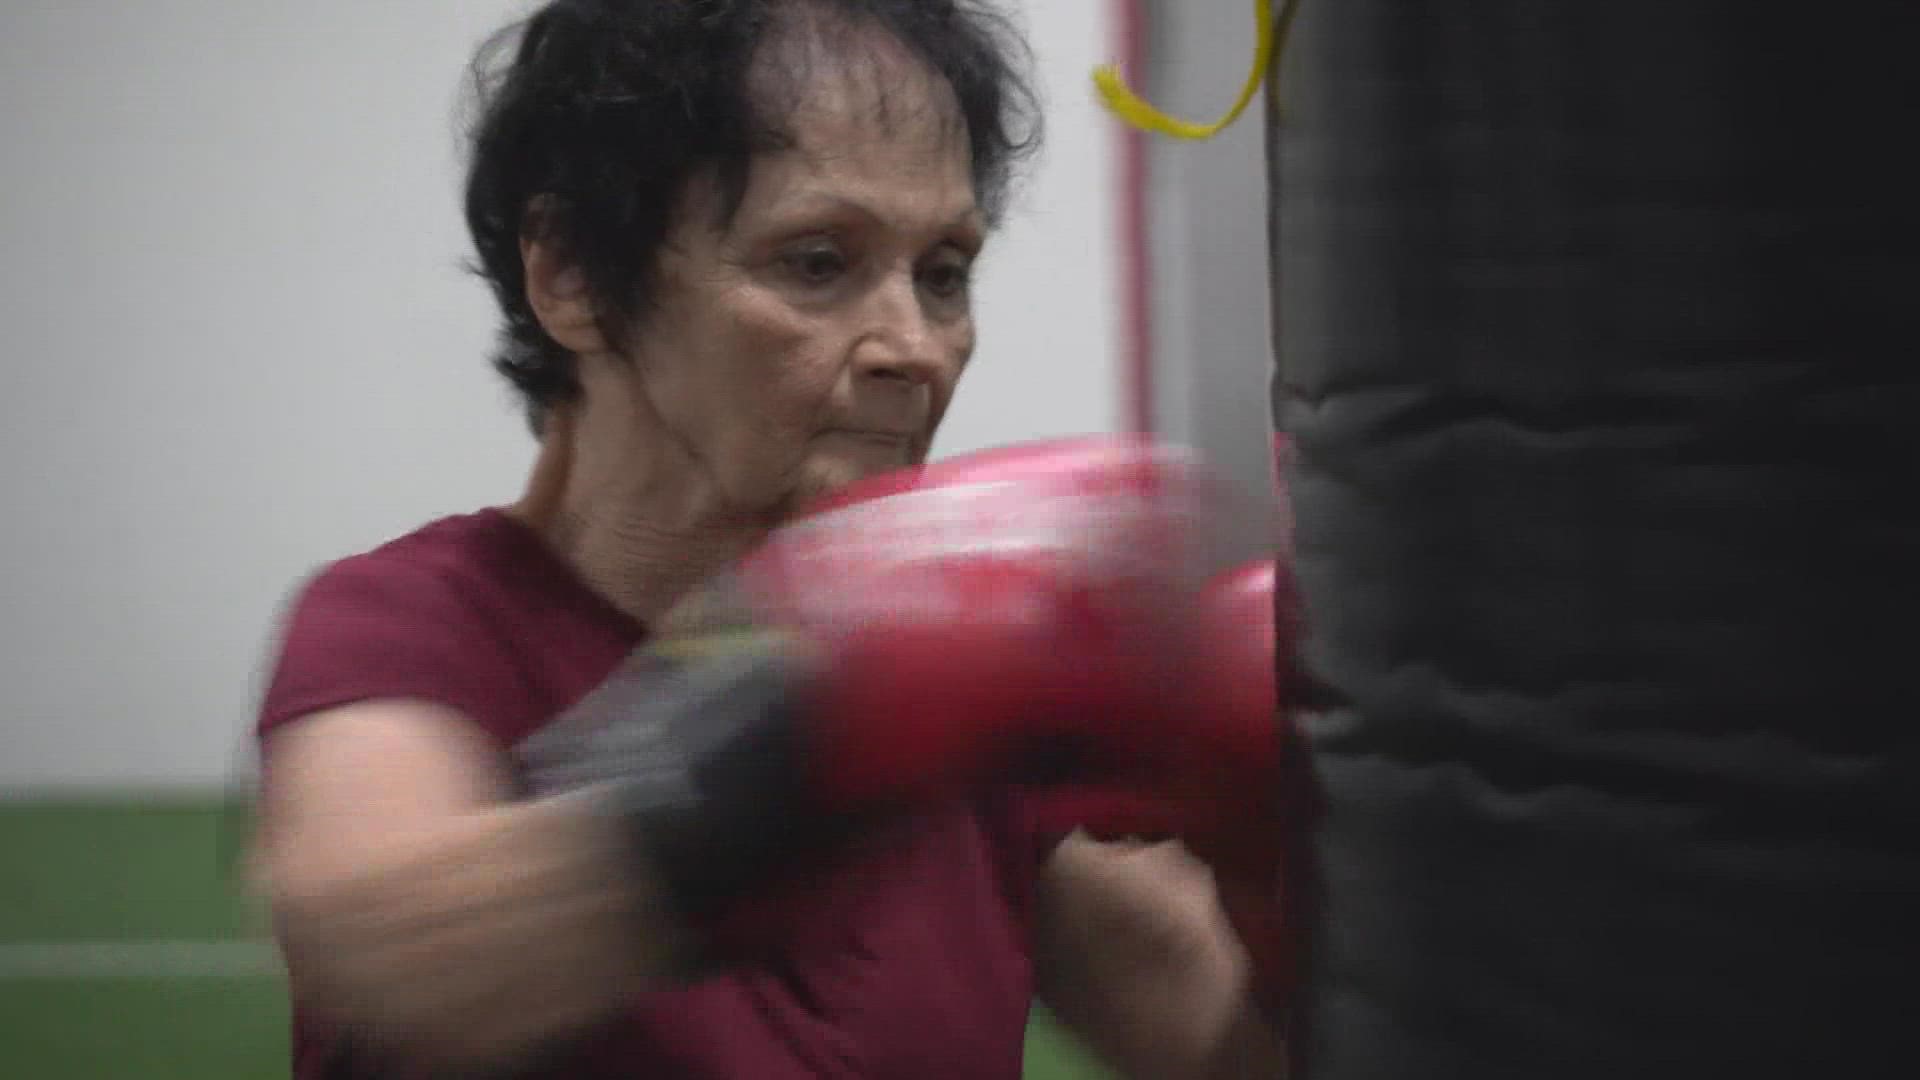 This gym helps people who are fighting Parkinson's disease to help them delay symptoms.